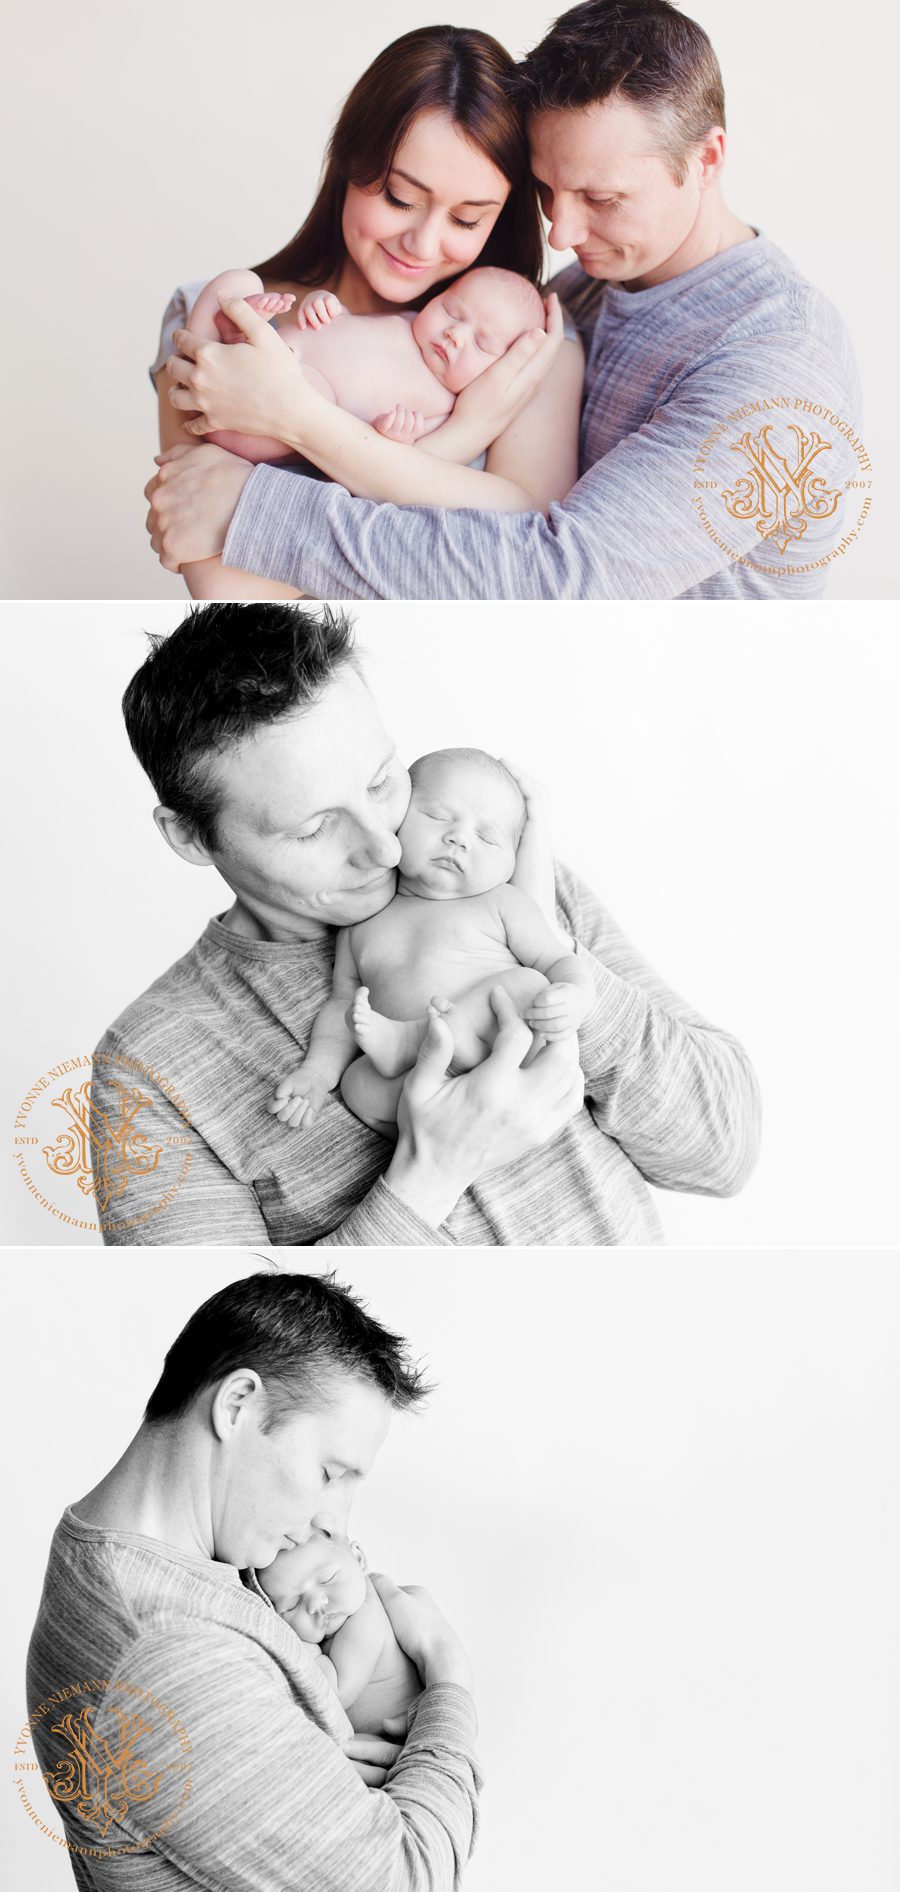 Watkinsville, GA newborn photography of father and daughter by Yvonne Niemann Photography.